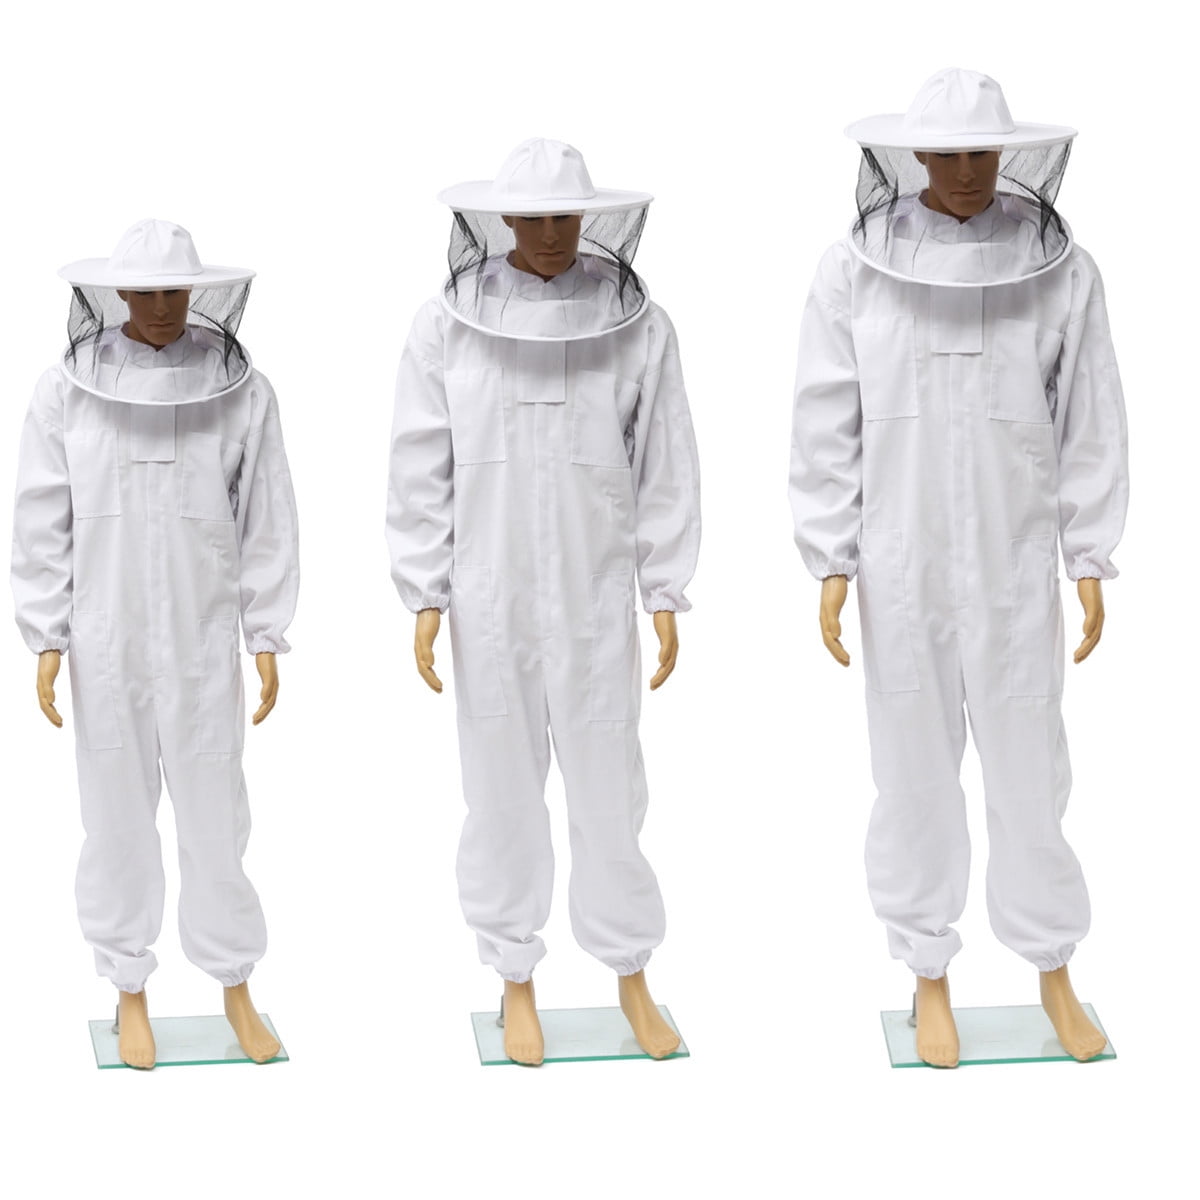 L AUCYV Cotton Full Body Professional Beekeeping Clothes Veil Hood Hat Clothing Jaket Protective Beekeeping Suit Beekeepers Bee Suit Equipment for Men & Women